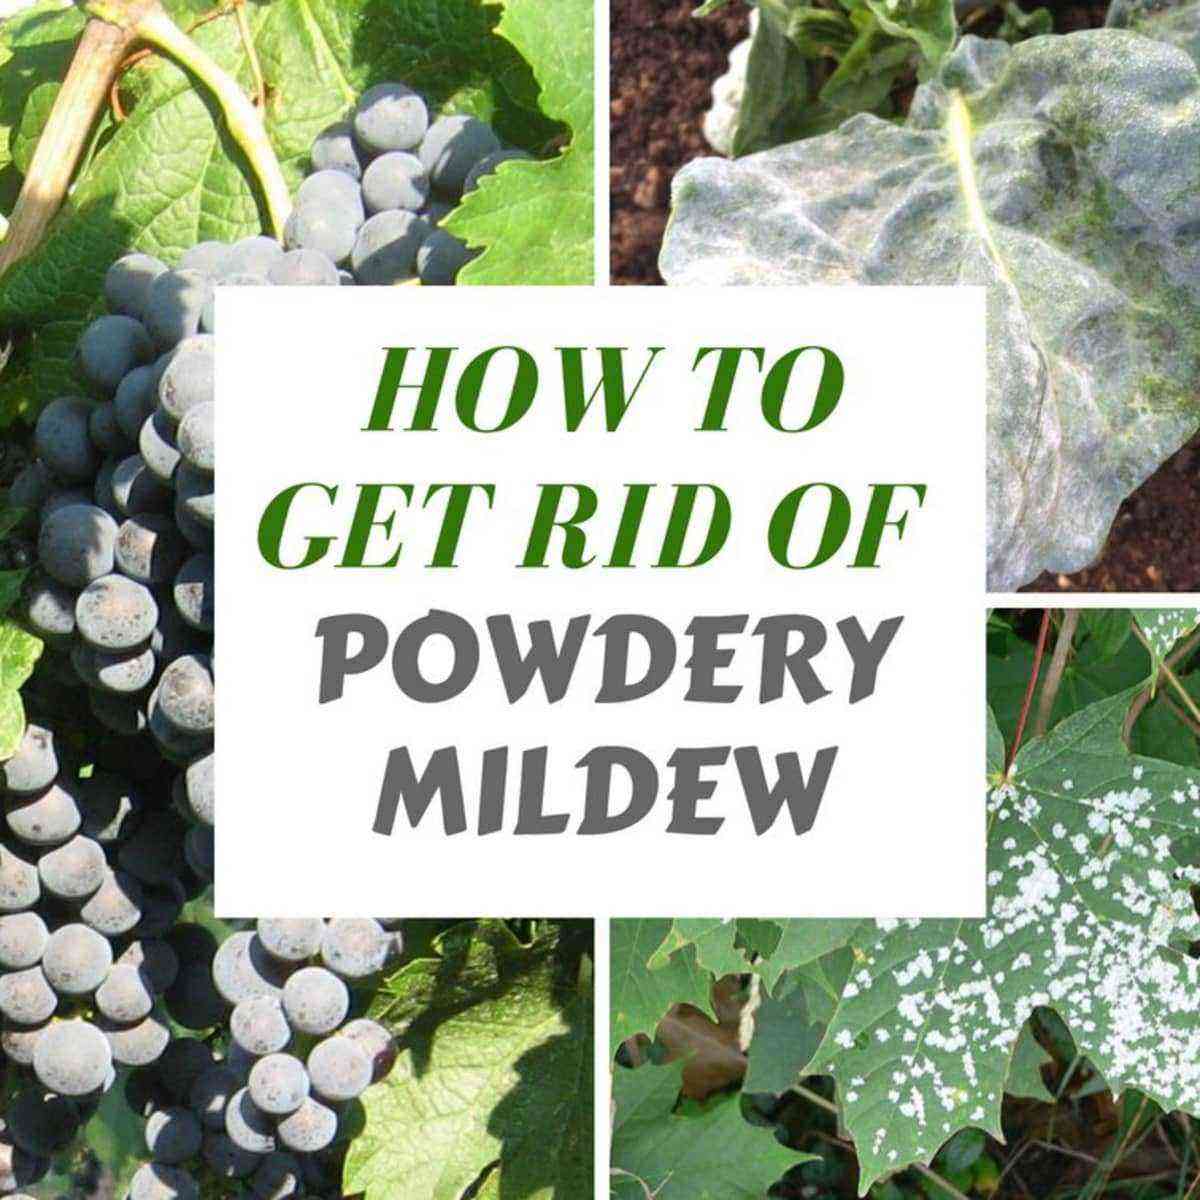 How to treat mildew on grapes?